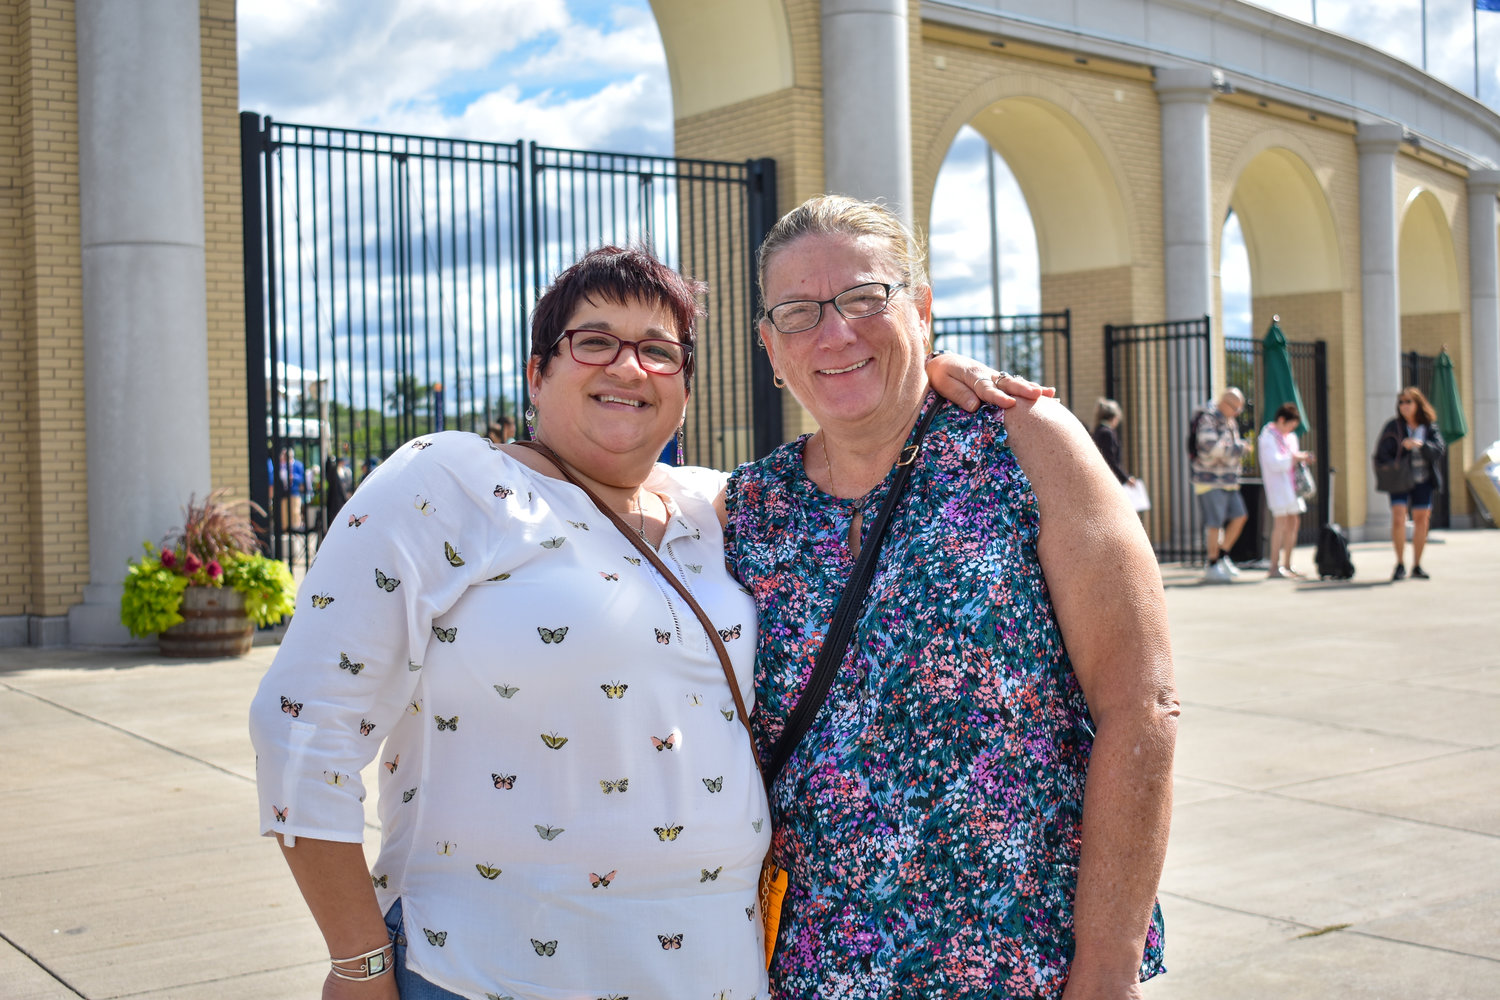 Best friends Leah Richmond, of Rome, and Karen Stepanick, of Utica, had simple motivations for attending the New York State Fair on Thursday, Sept. 1 — "food, drink, and wine coolers."